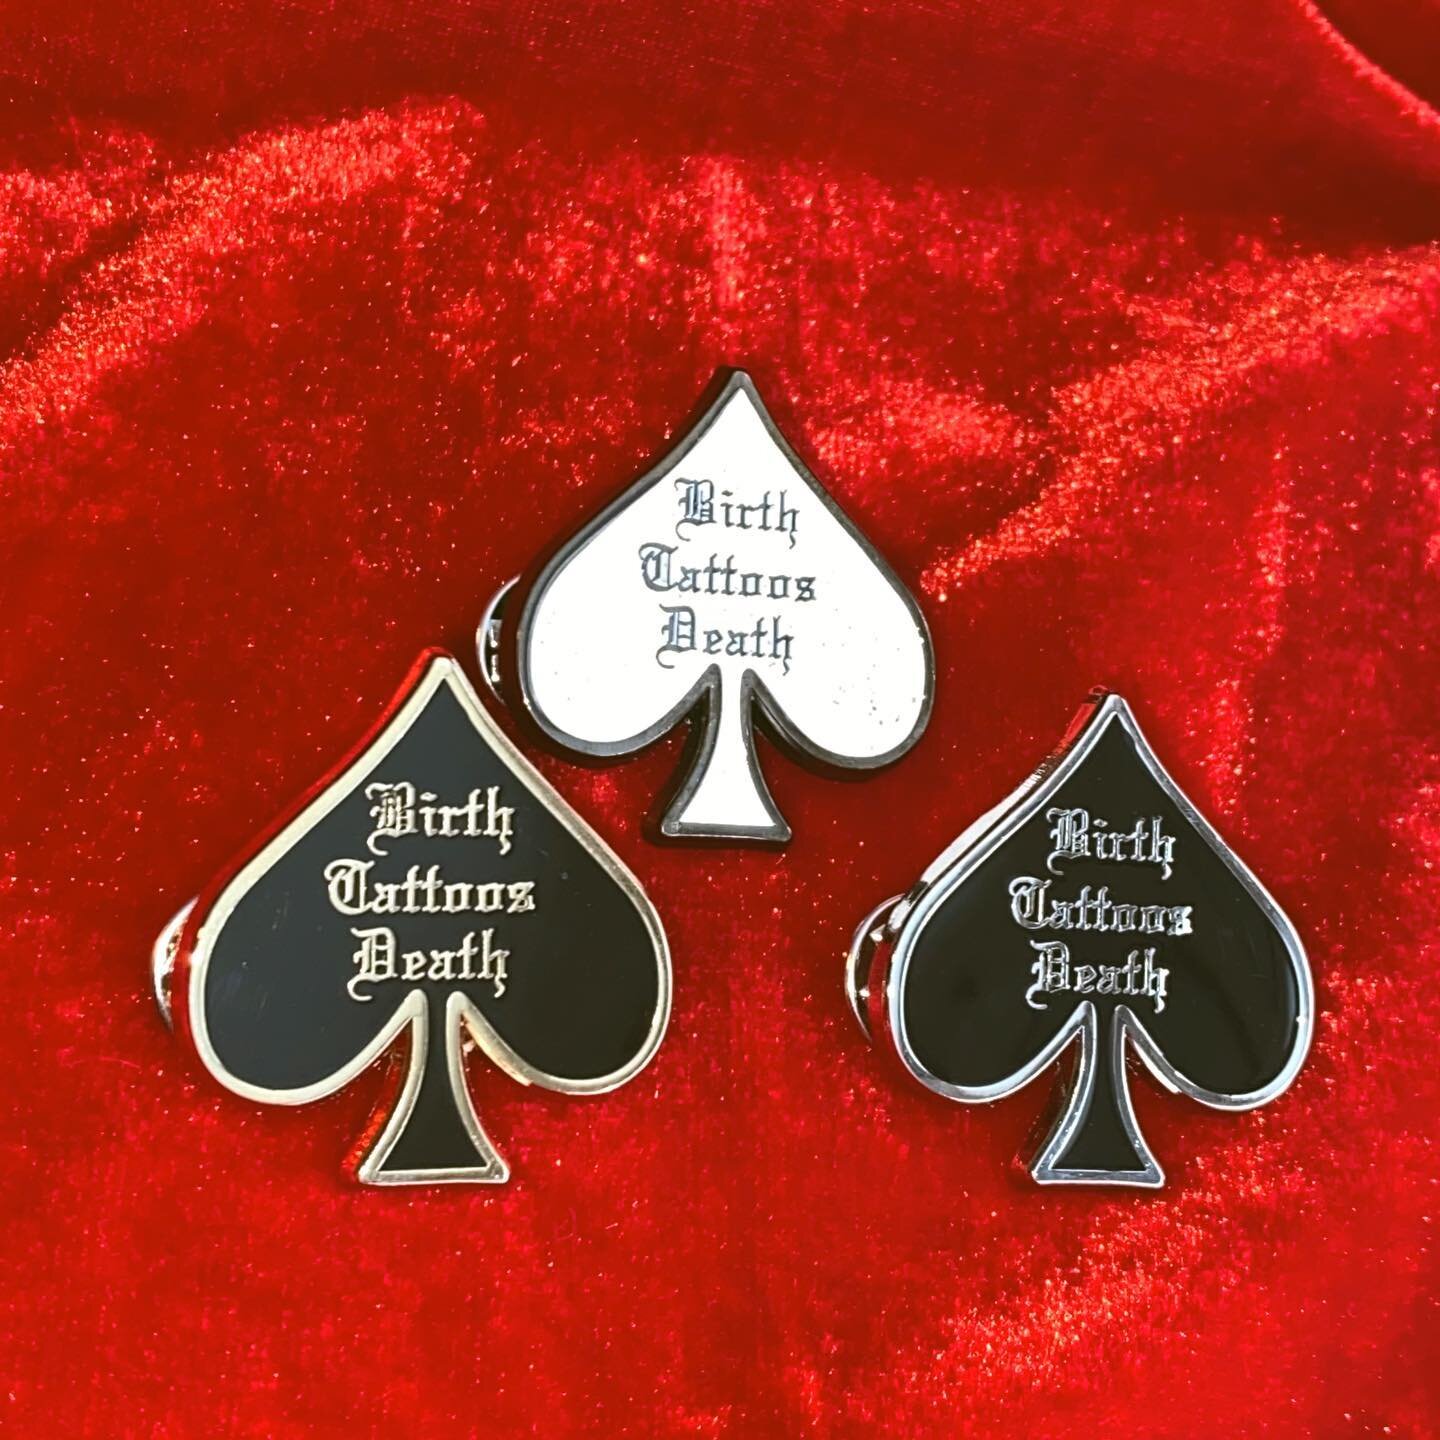 &spades;️ Birth, Tattoos, Death&hellip;.&amp; Pins &spades;️
Made these killer pins for my favorite rock n roll babe @bzelliott - follow her &amp; snag these babies from her website!

&amp; as always.. DM or follow link in bio for custom enamel pins 